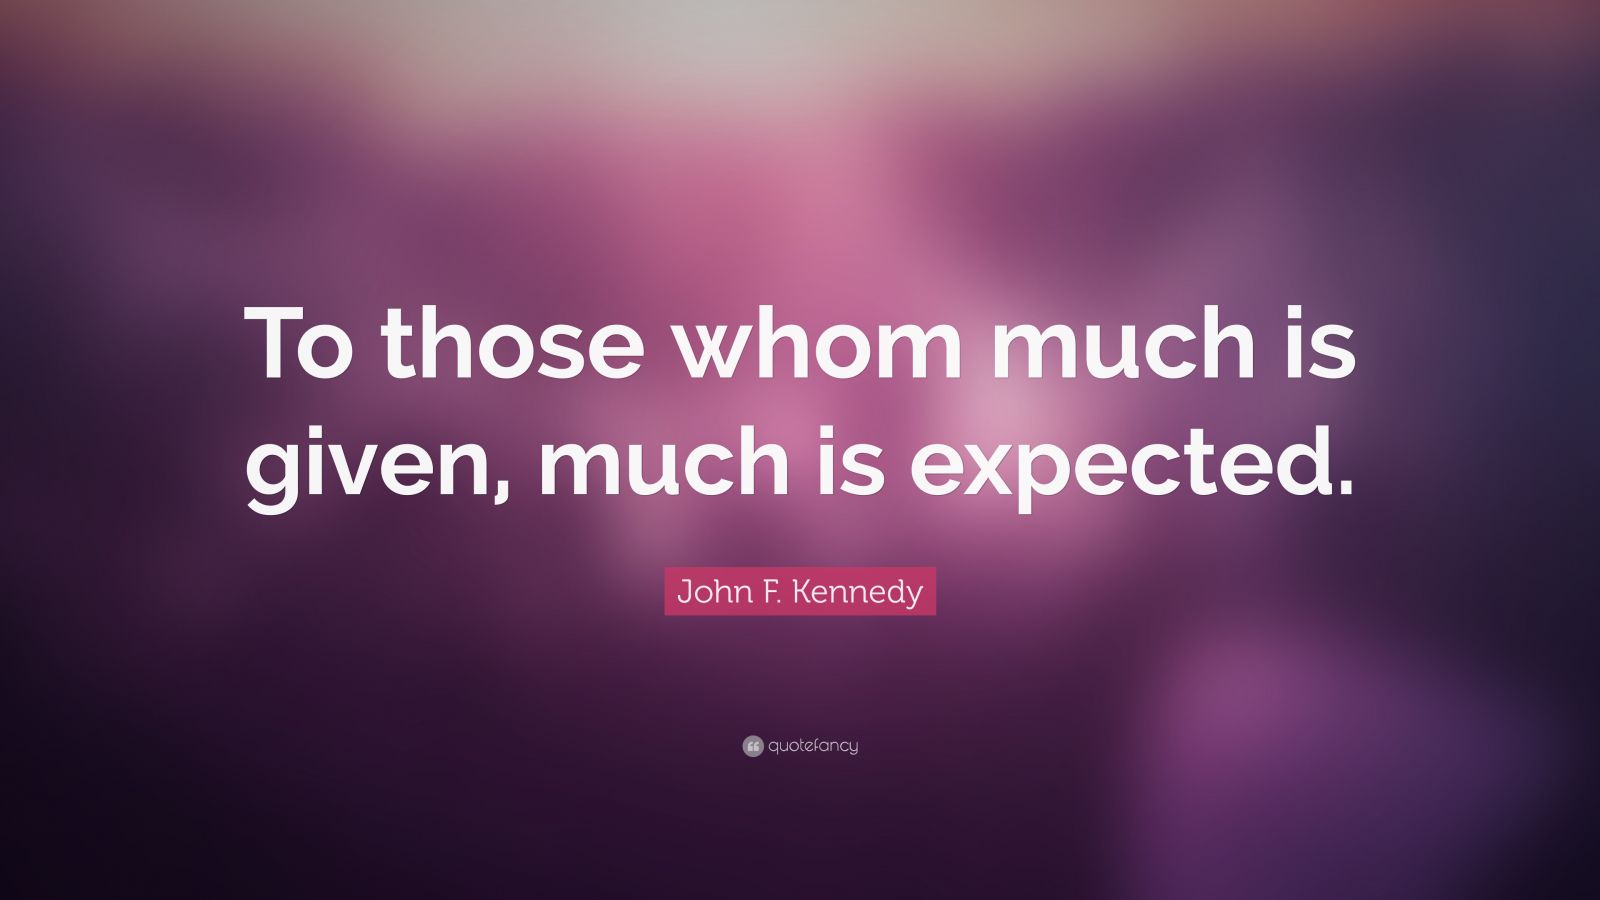 John F. Kennedy Quote: “To those whom much is given, much is expected ...